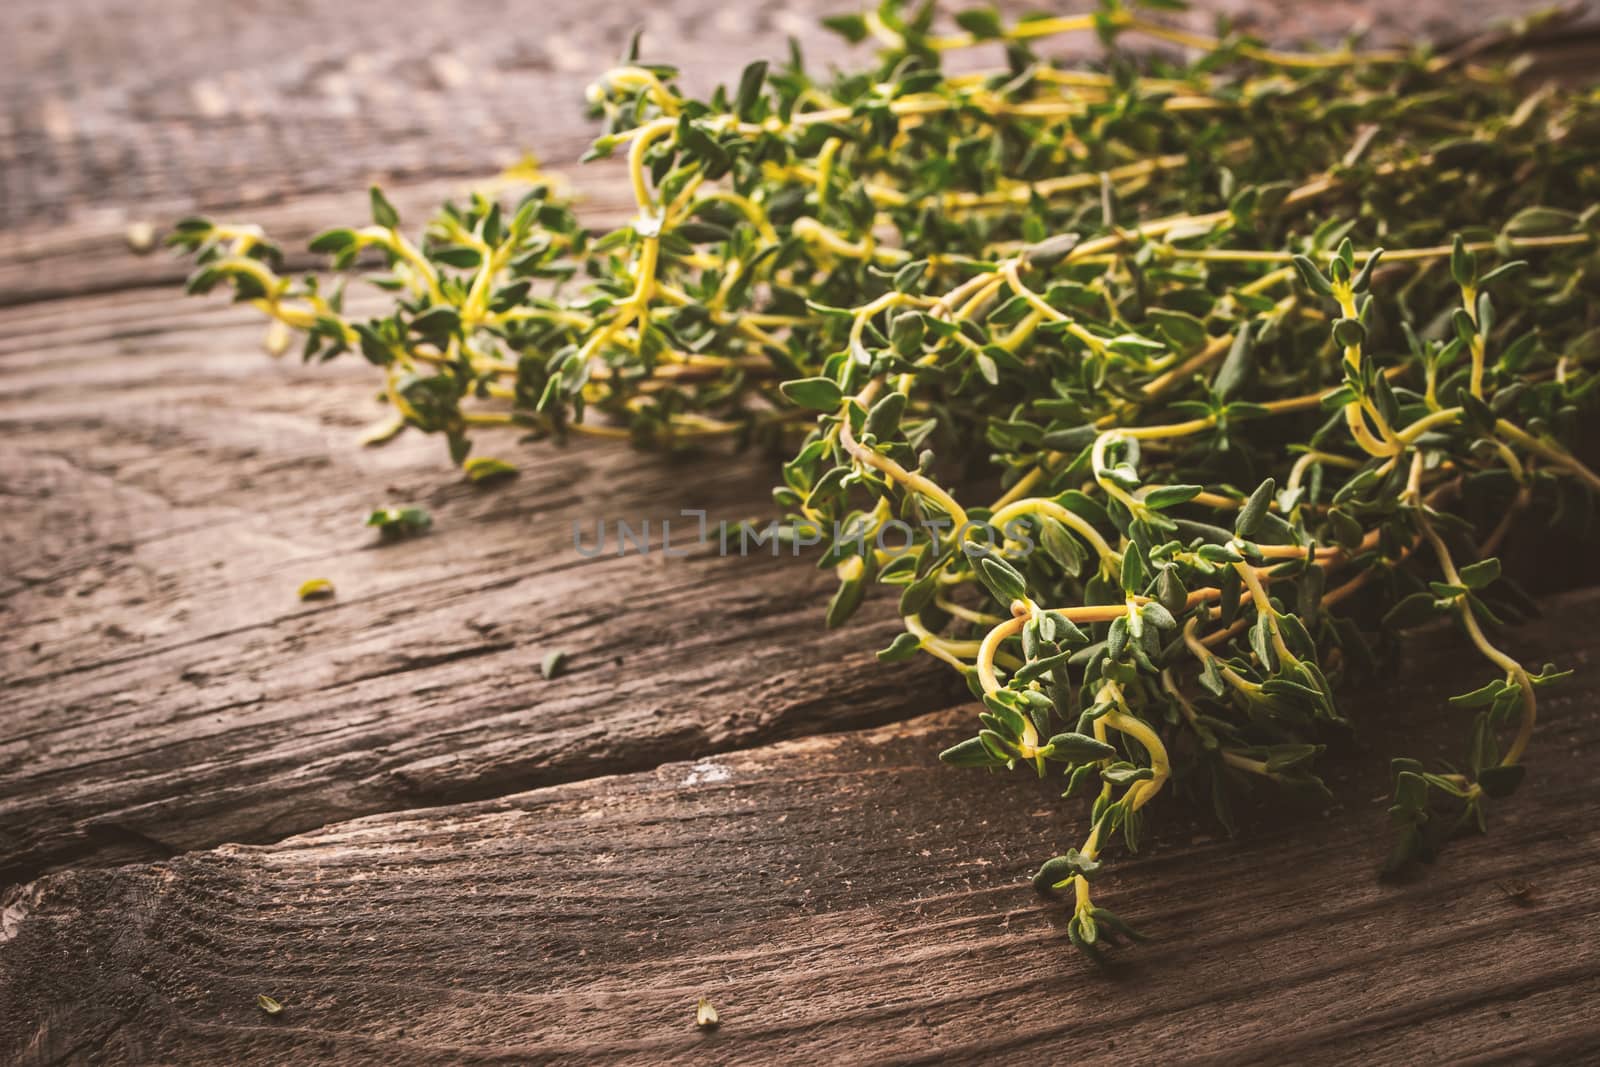 Bunch of thyme on the old wooden board horizontal